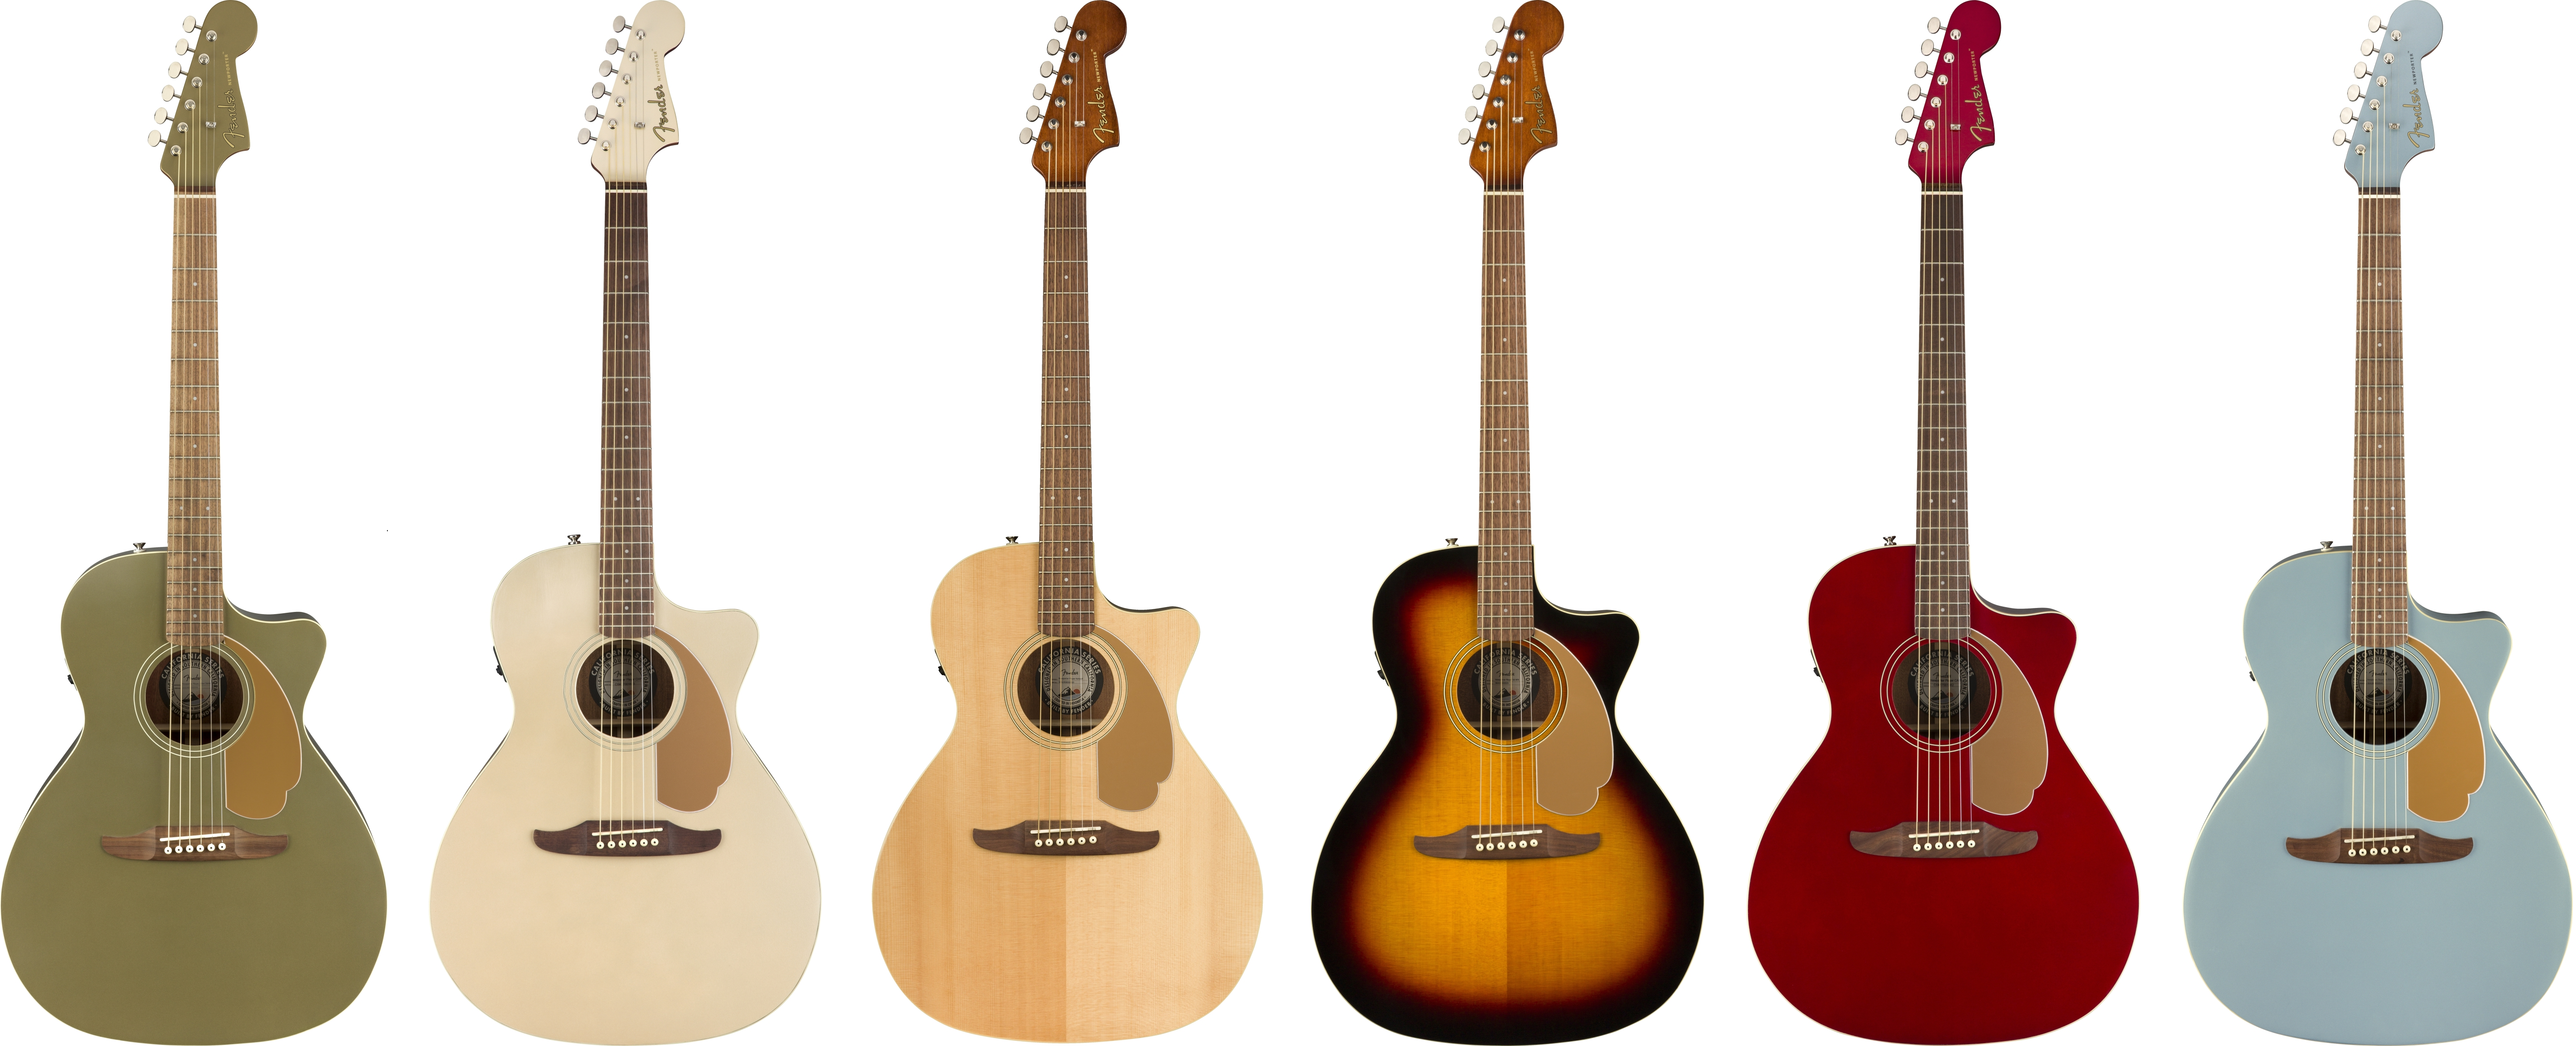 Fender Newporter Player colors available